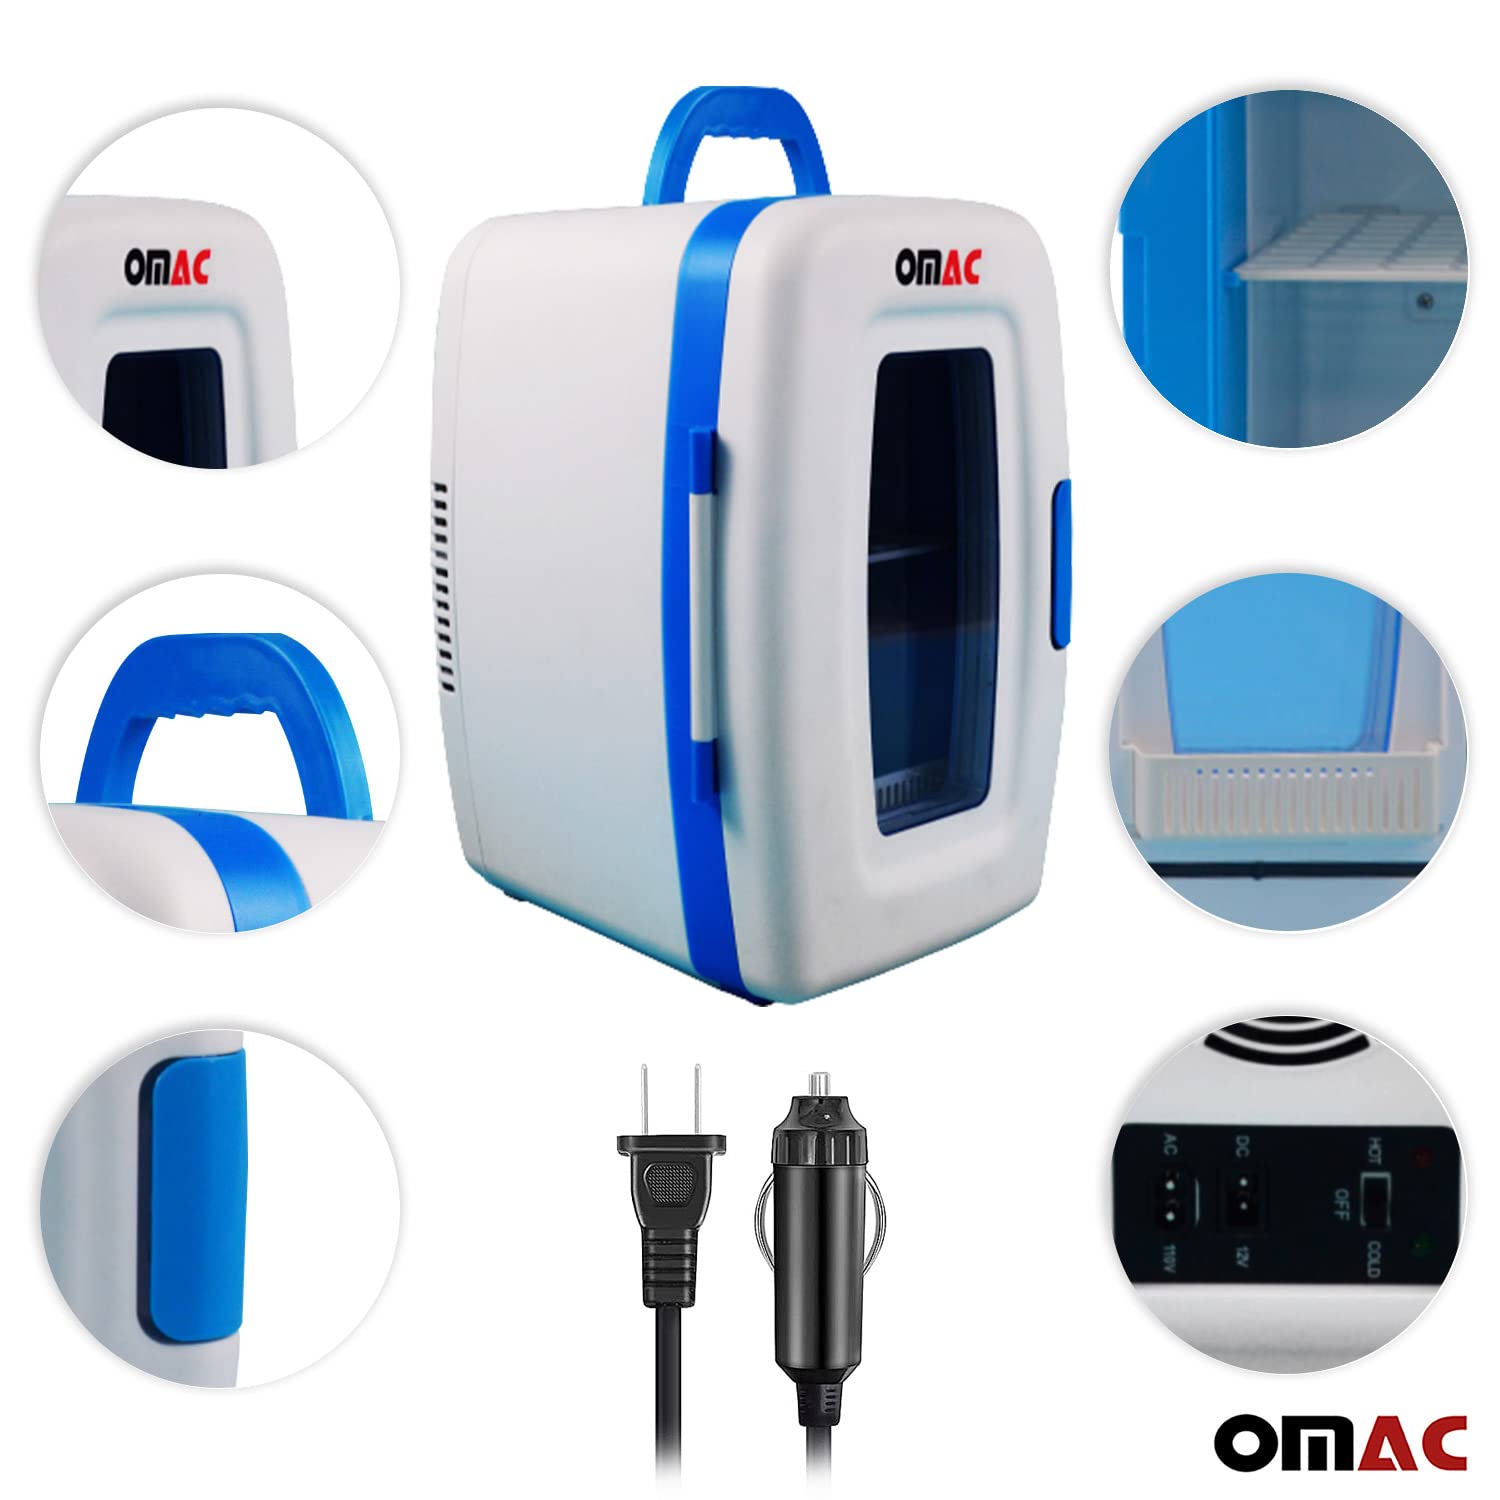 OMAC Mini Fridge for Cosmetics Camping Home Office and Car, Portable, 12V, AC/DC Power, 10 Liter, White